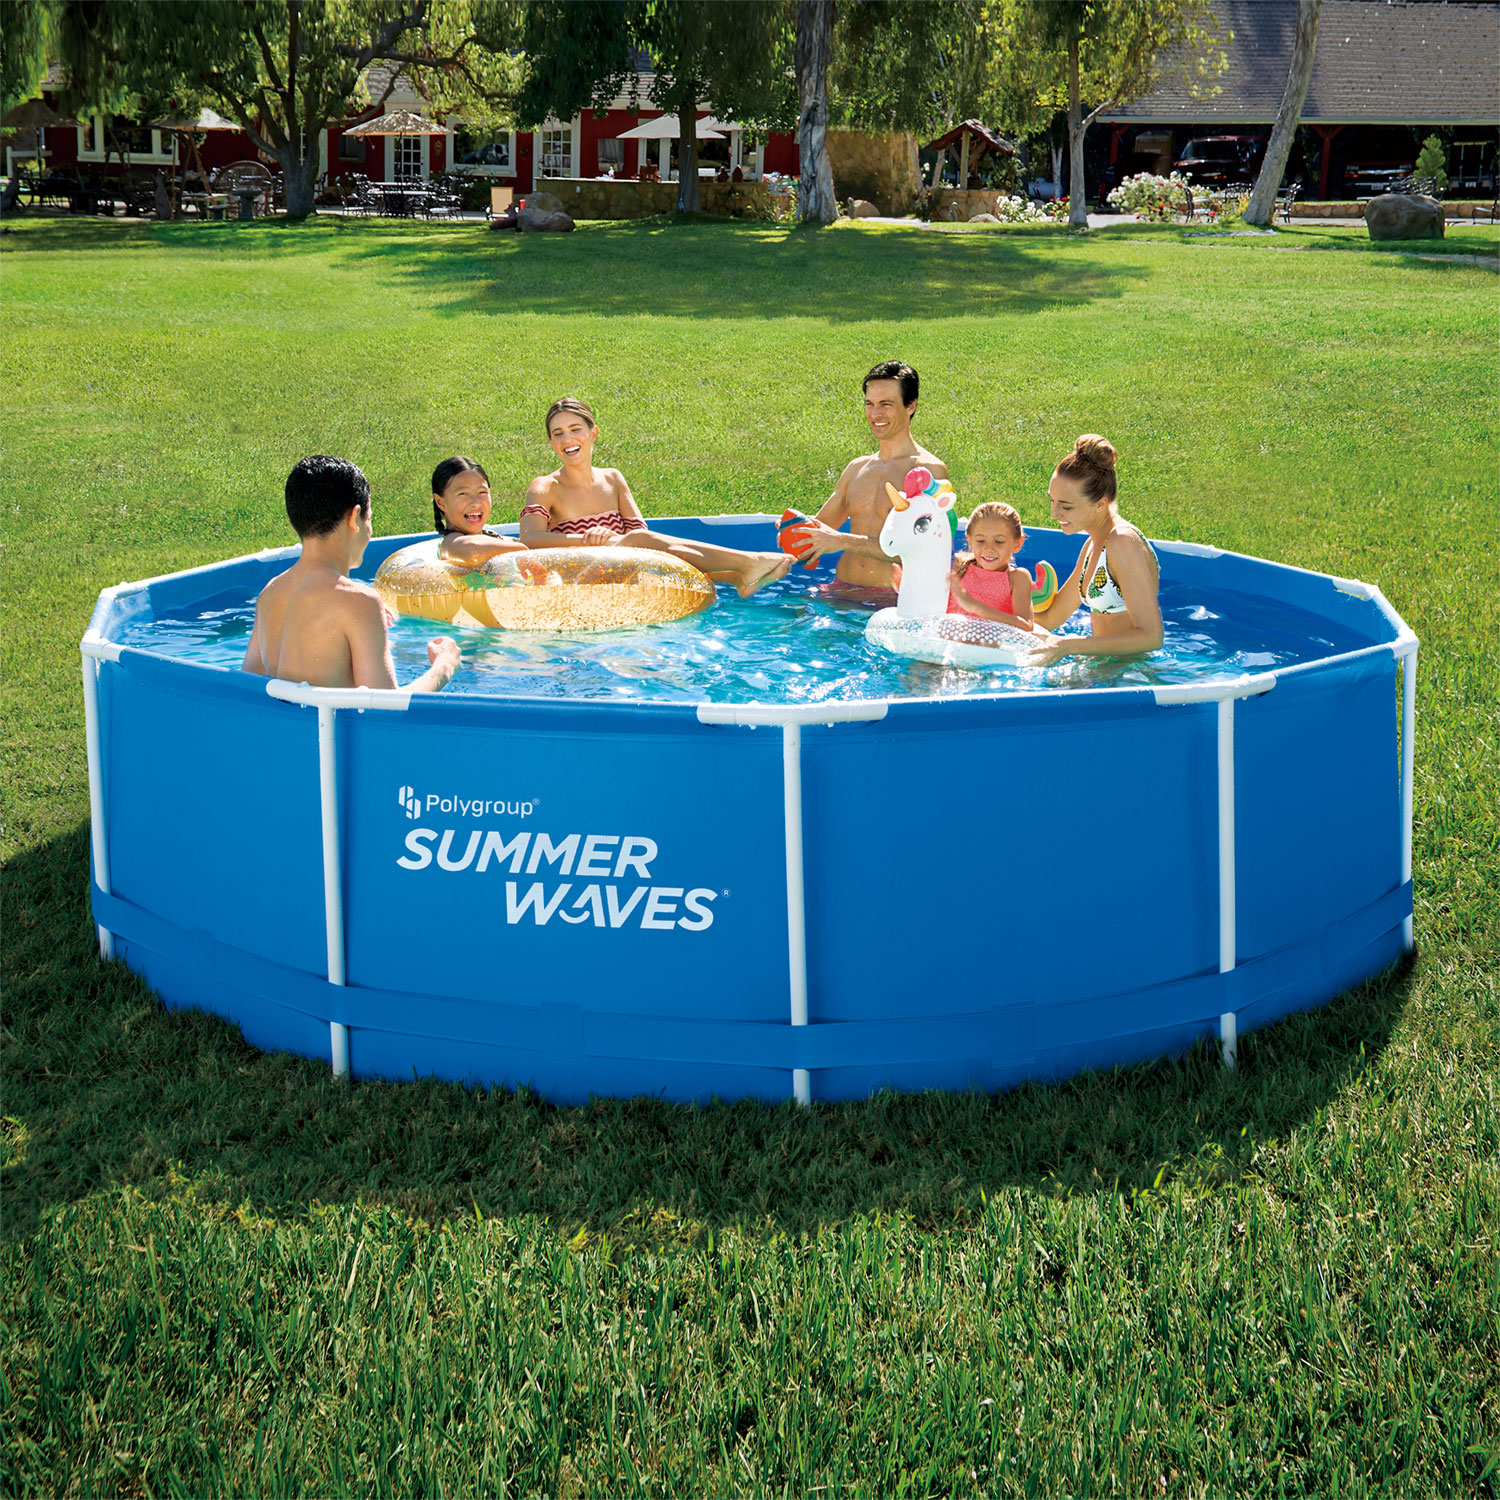 Simple Summer Waves 24 X52 Metal Frame Above Ground Swimming Pool for Small Space